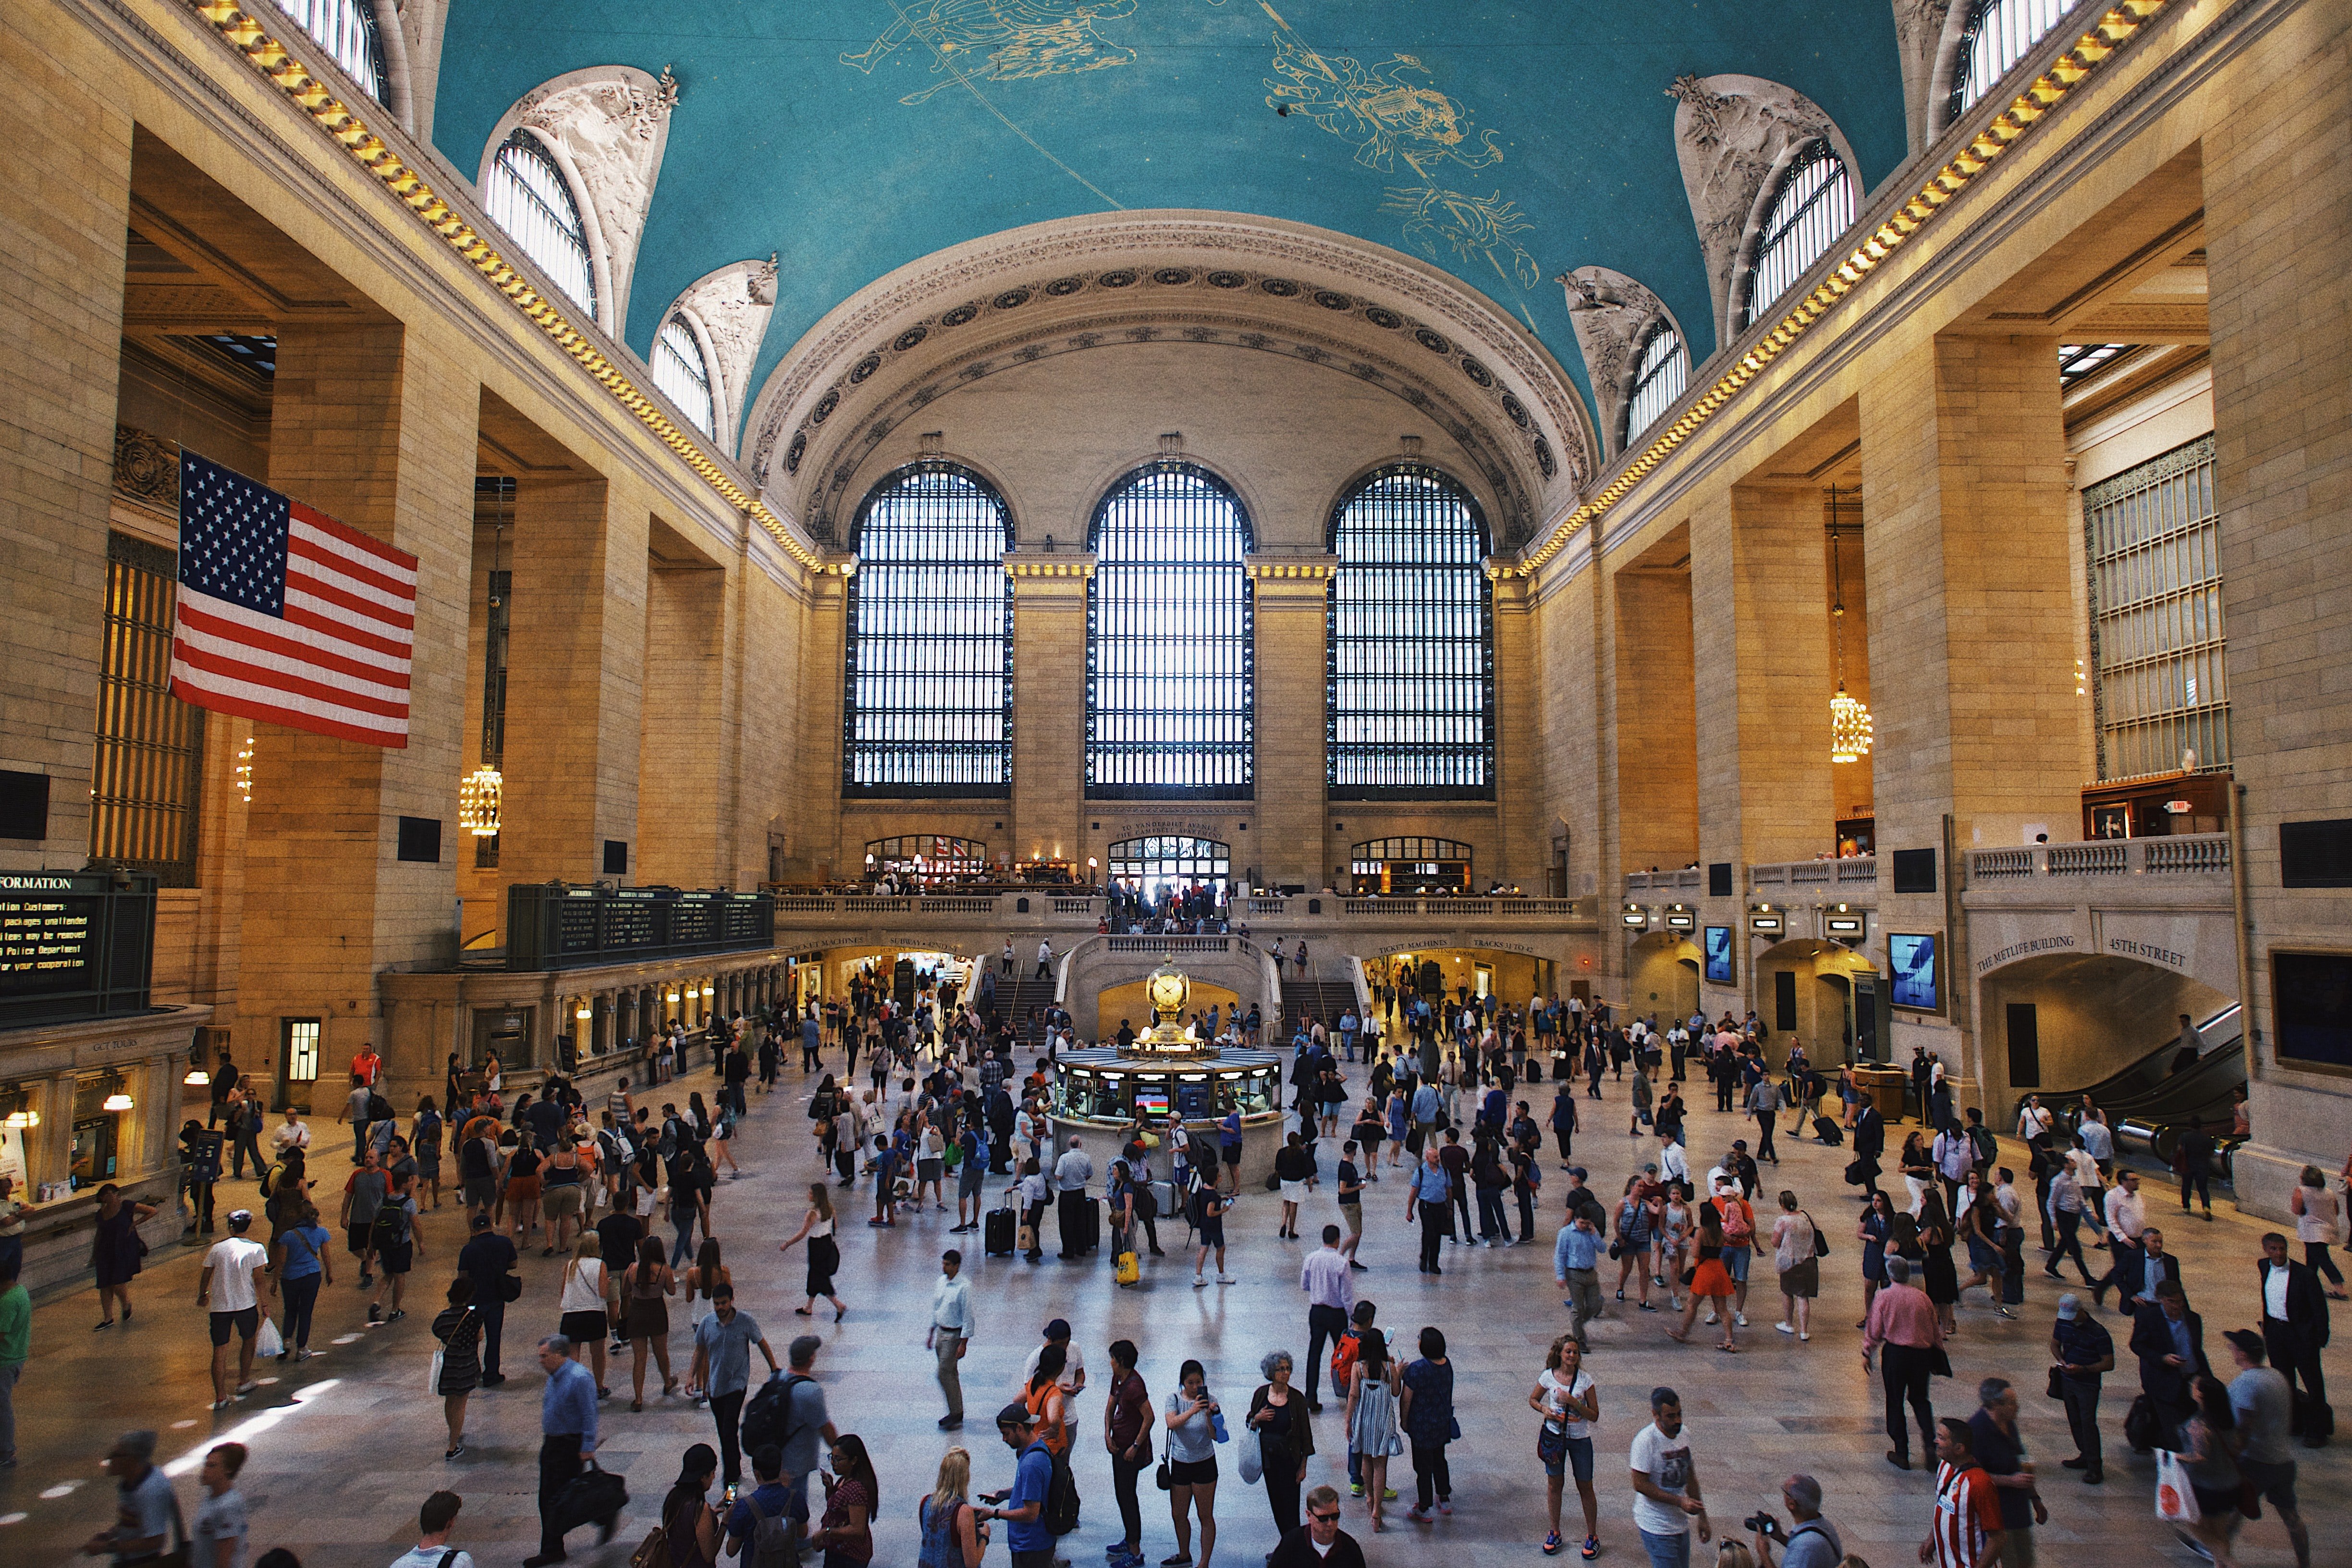 Lots of people in the central hall of New York's train station